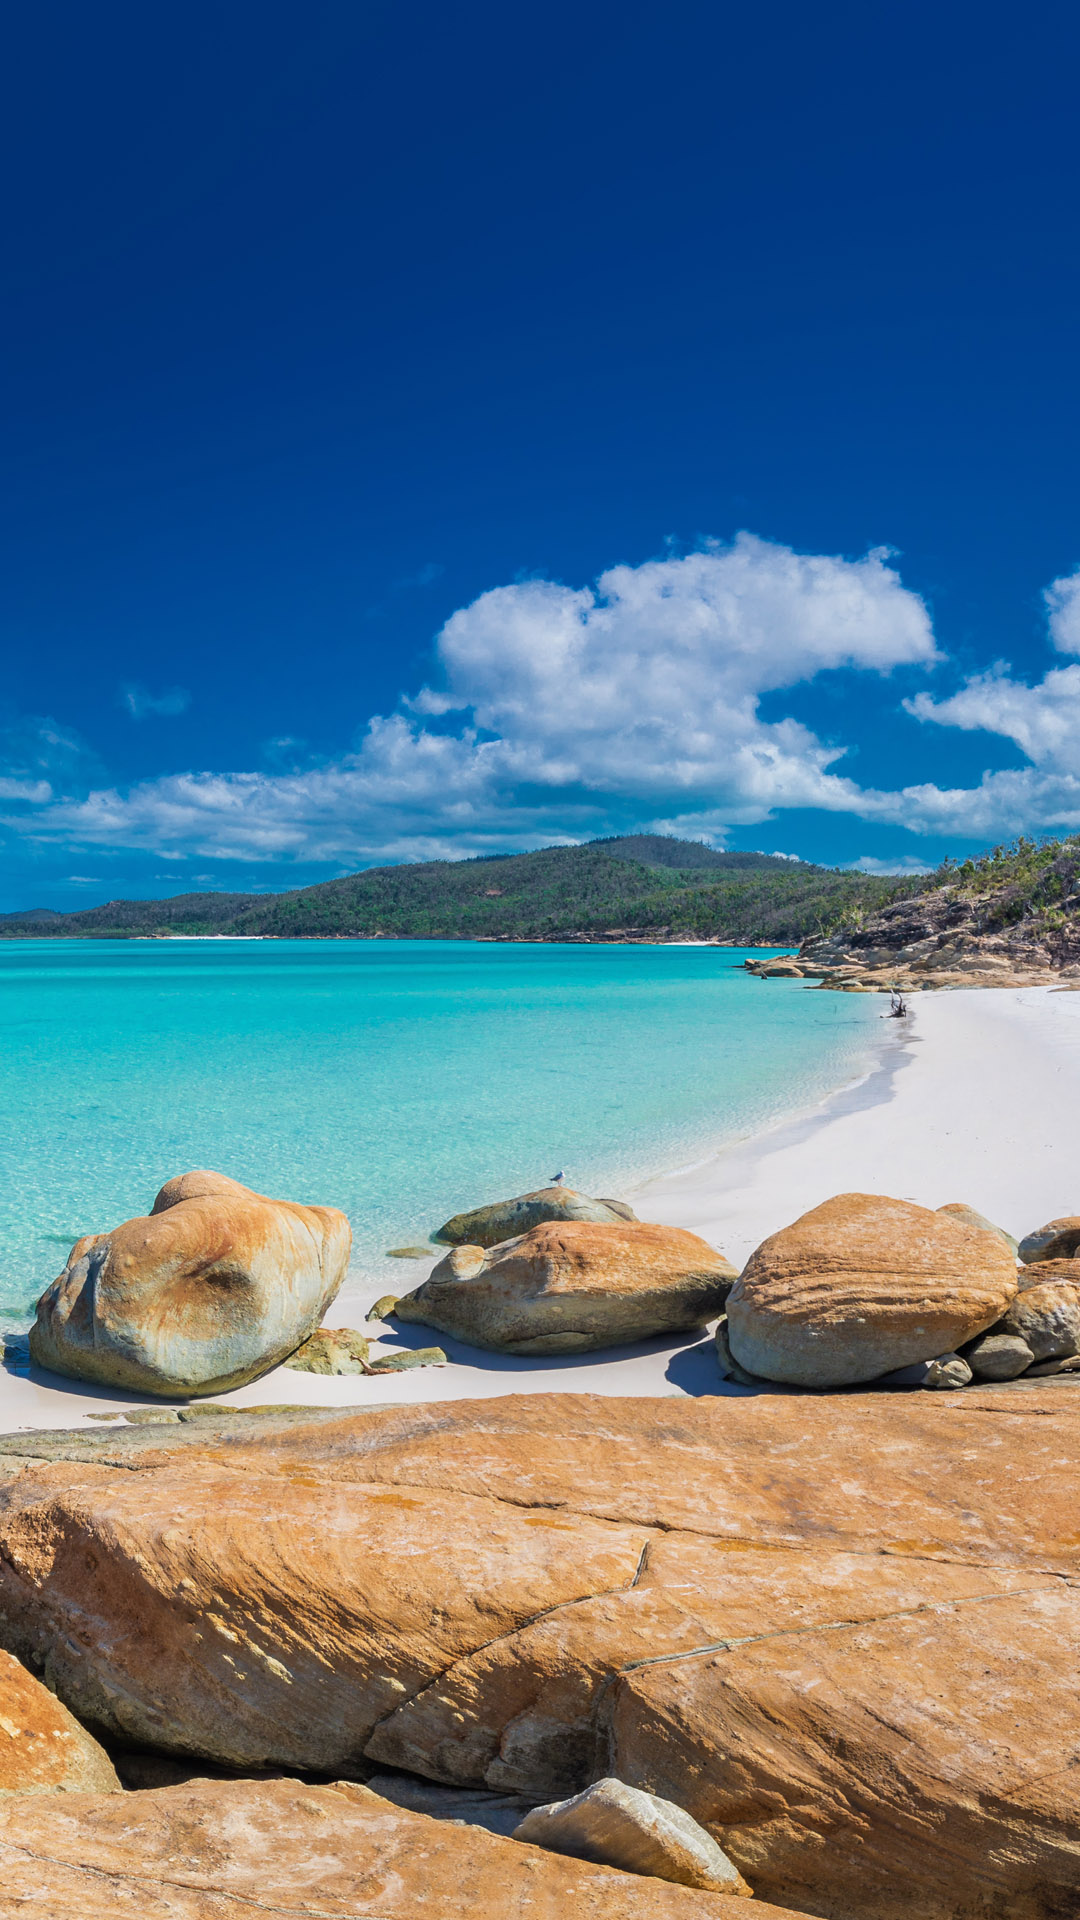 Panorama Of The Whitehaven Beach In The Whitsunday Islands Queensland